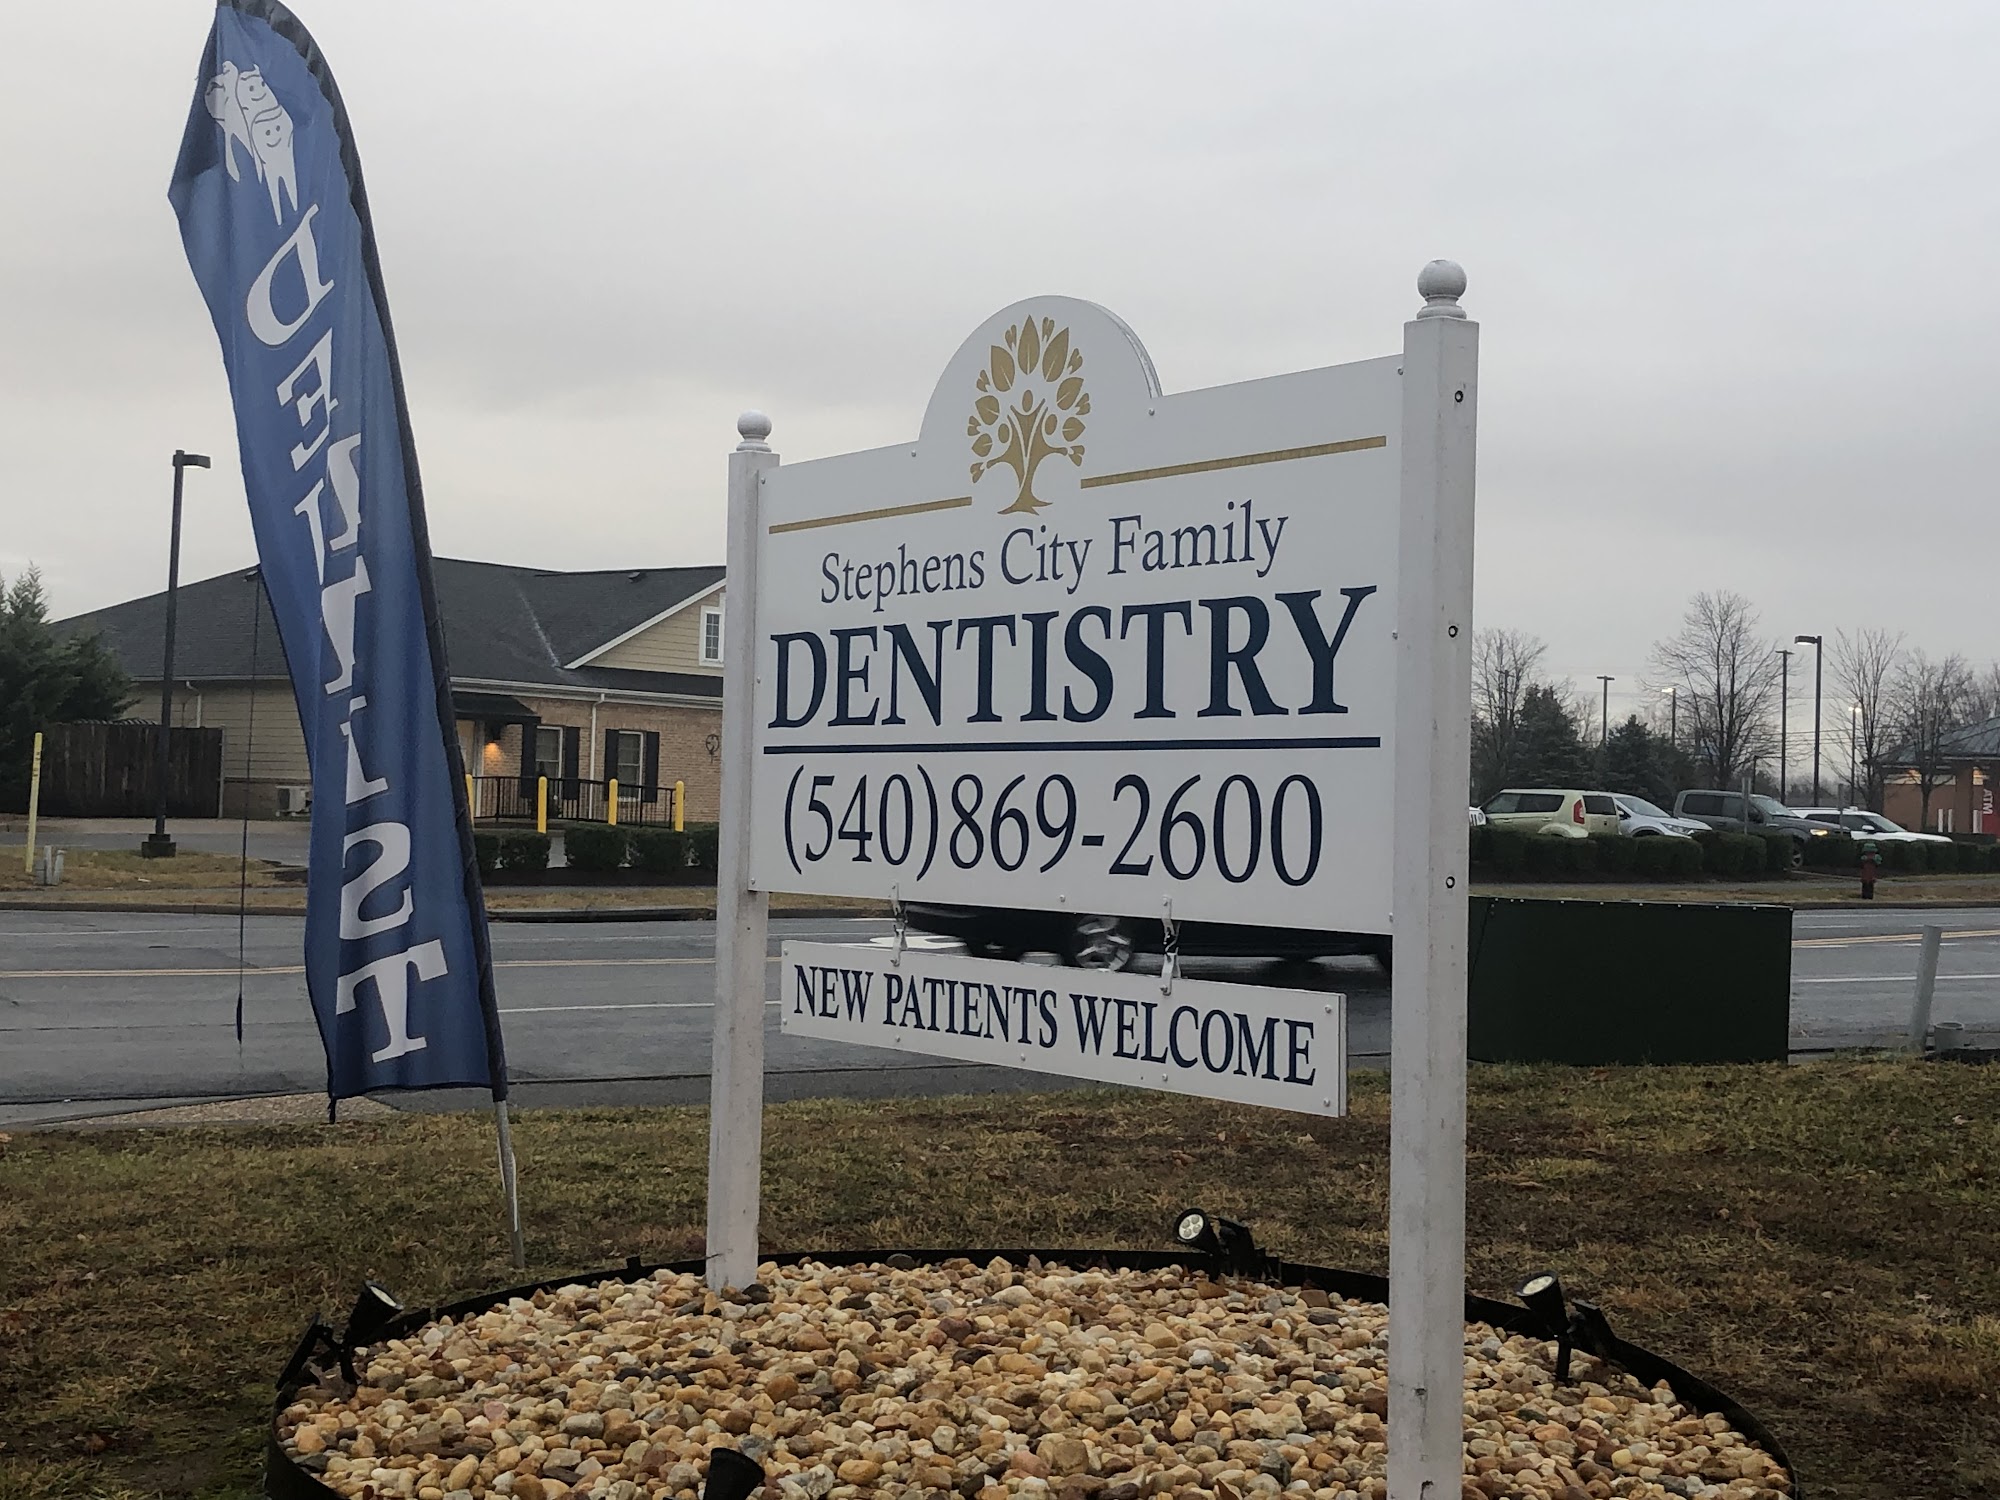 Stephens City Family Dentistry: Dr. Young Lim D.D.S. and Dr. Richard L. Taliaferro D.D.S. 175 Warrior Dr, Stephens City Virginia 22655